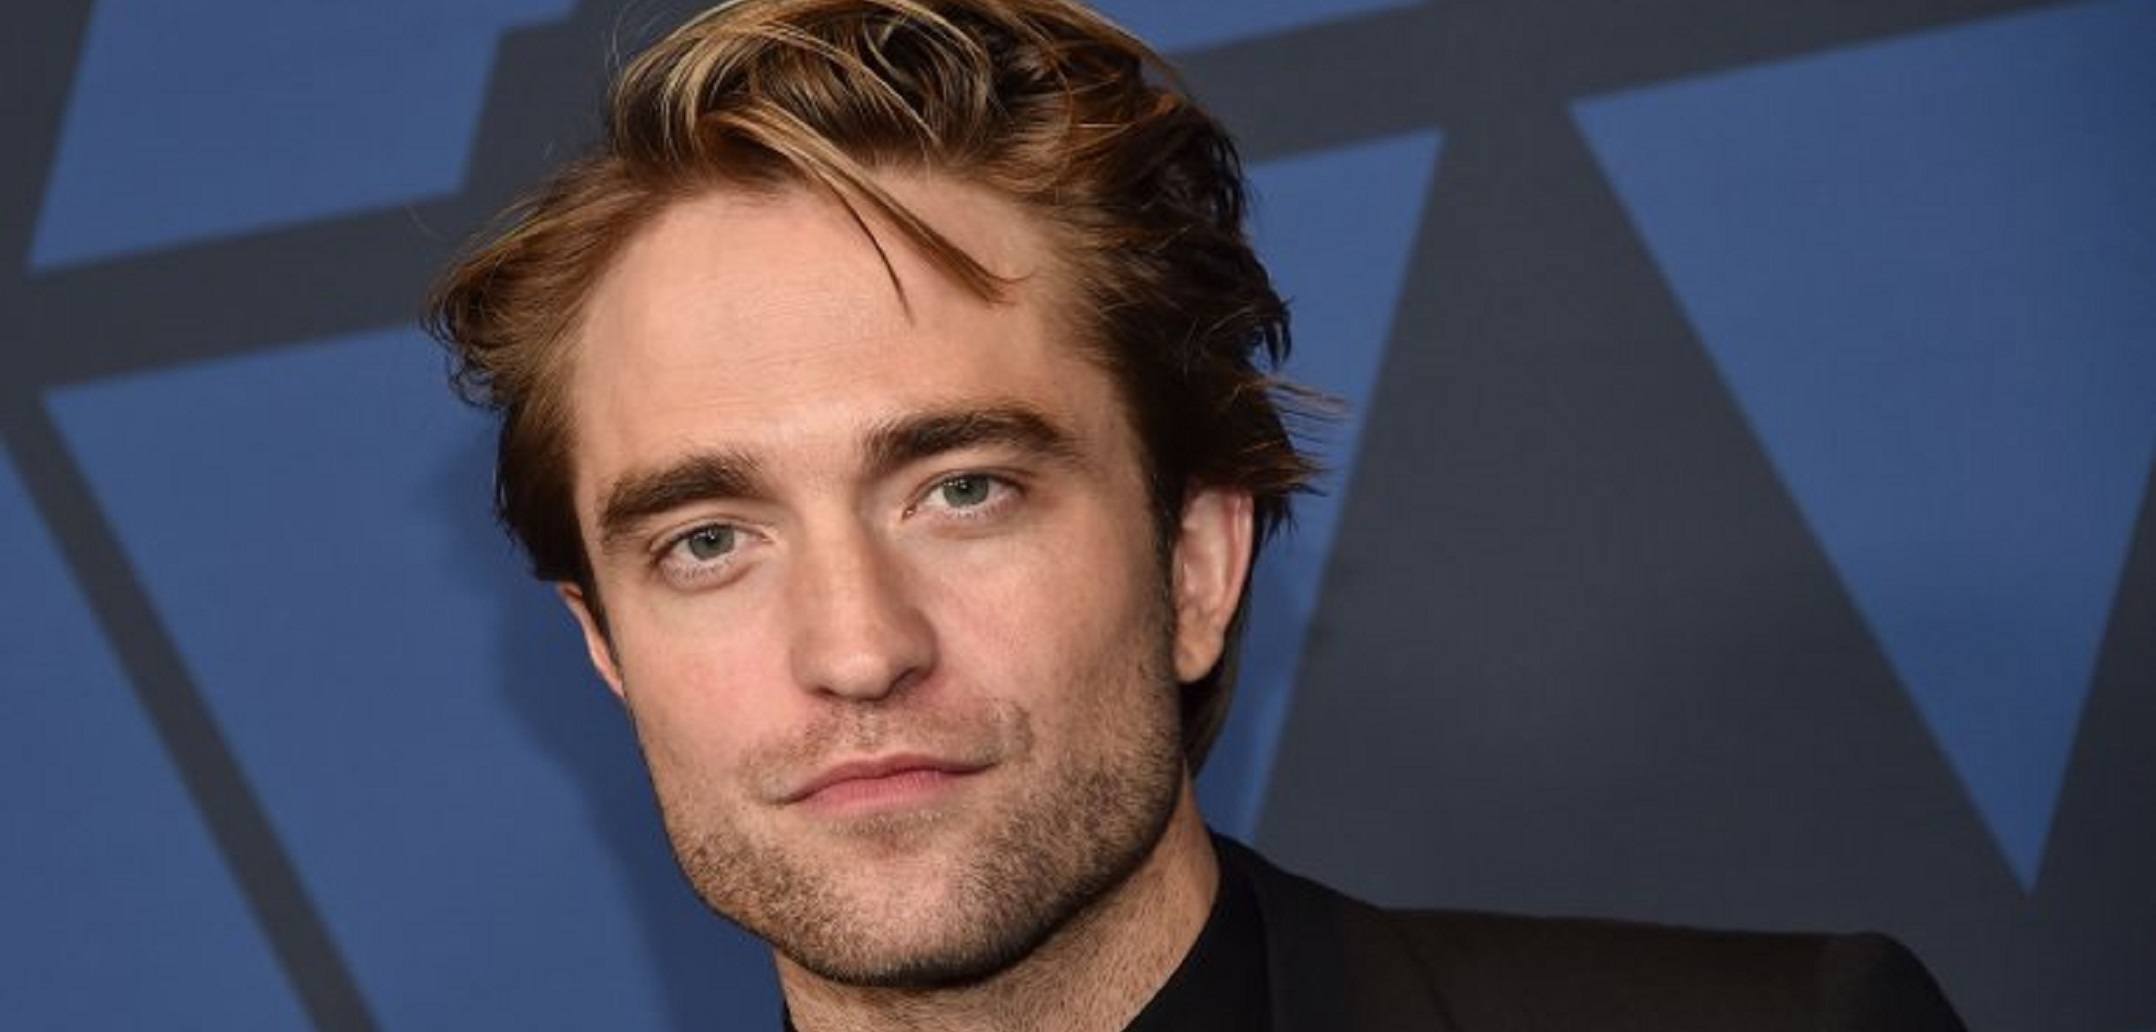 Robert Pattinson Has Been Named ‘World’s Most Handsome Man’ By Scientists